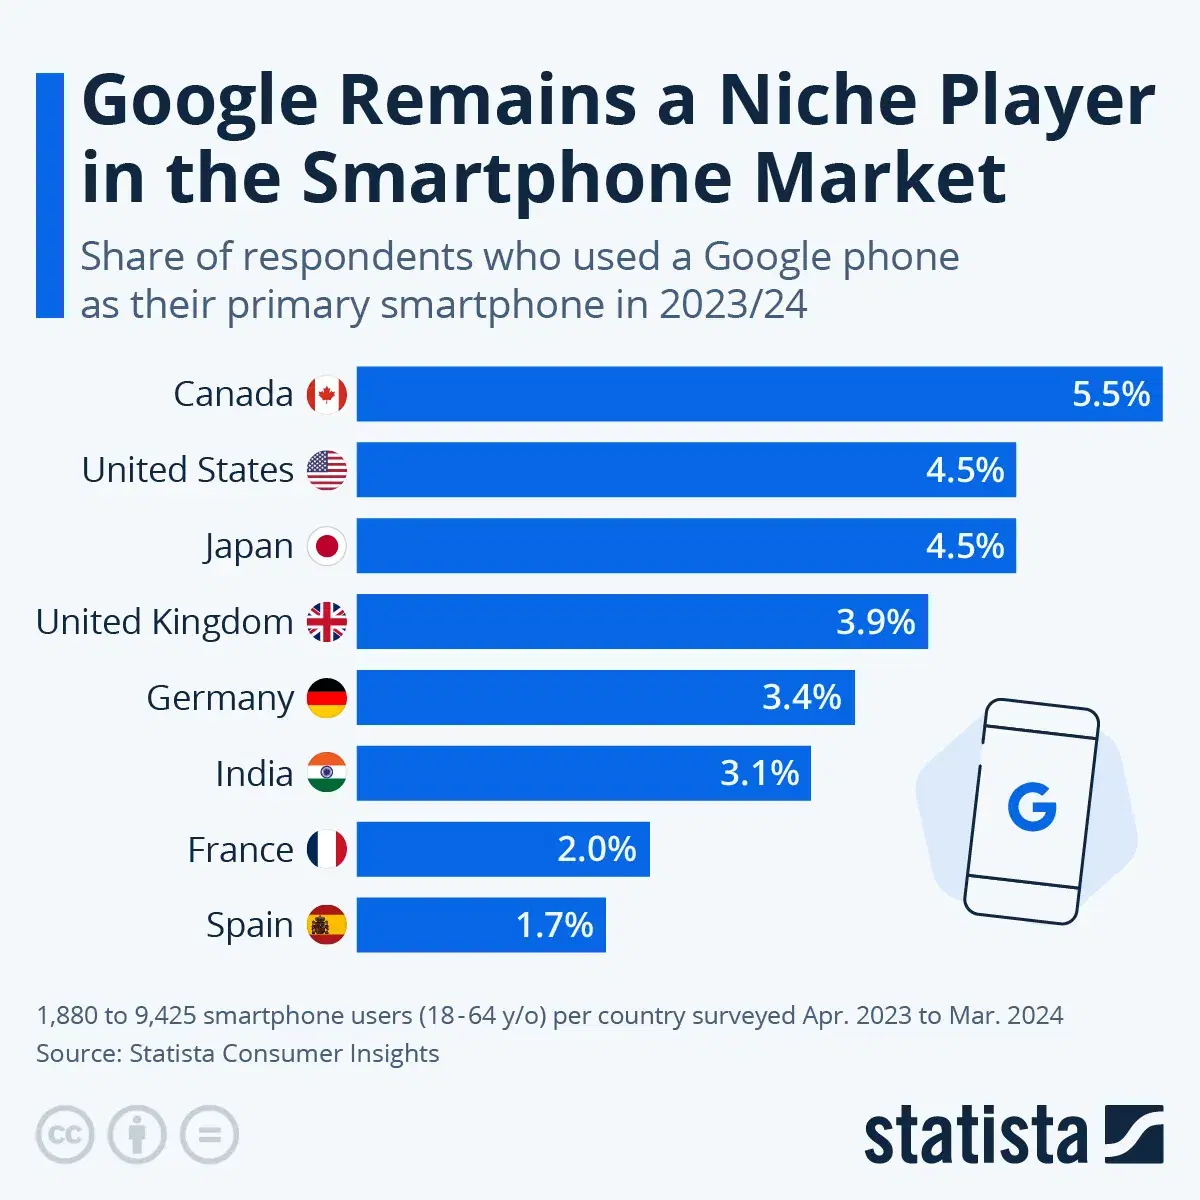 Google Remains a Niche Player in the Smartphone Market